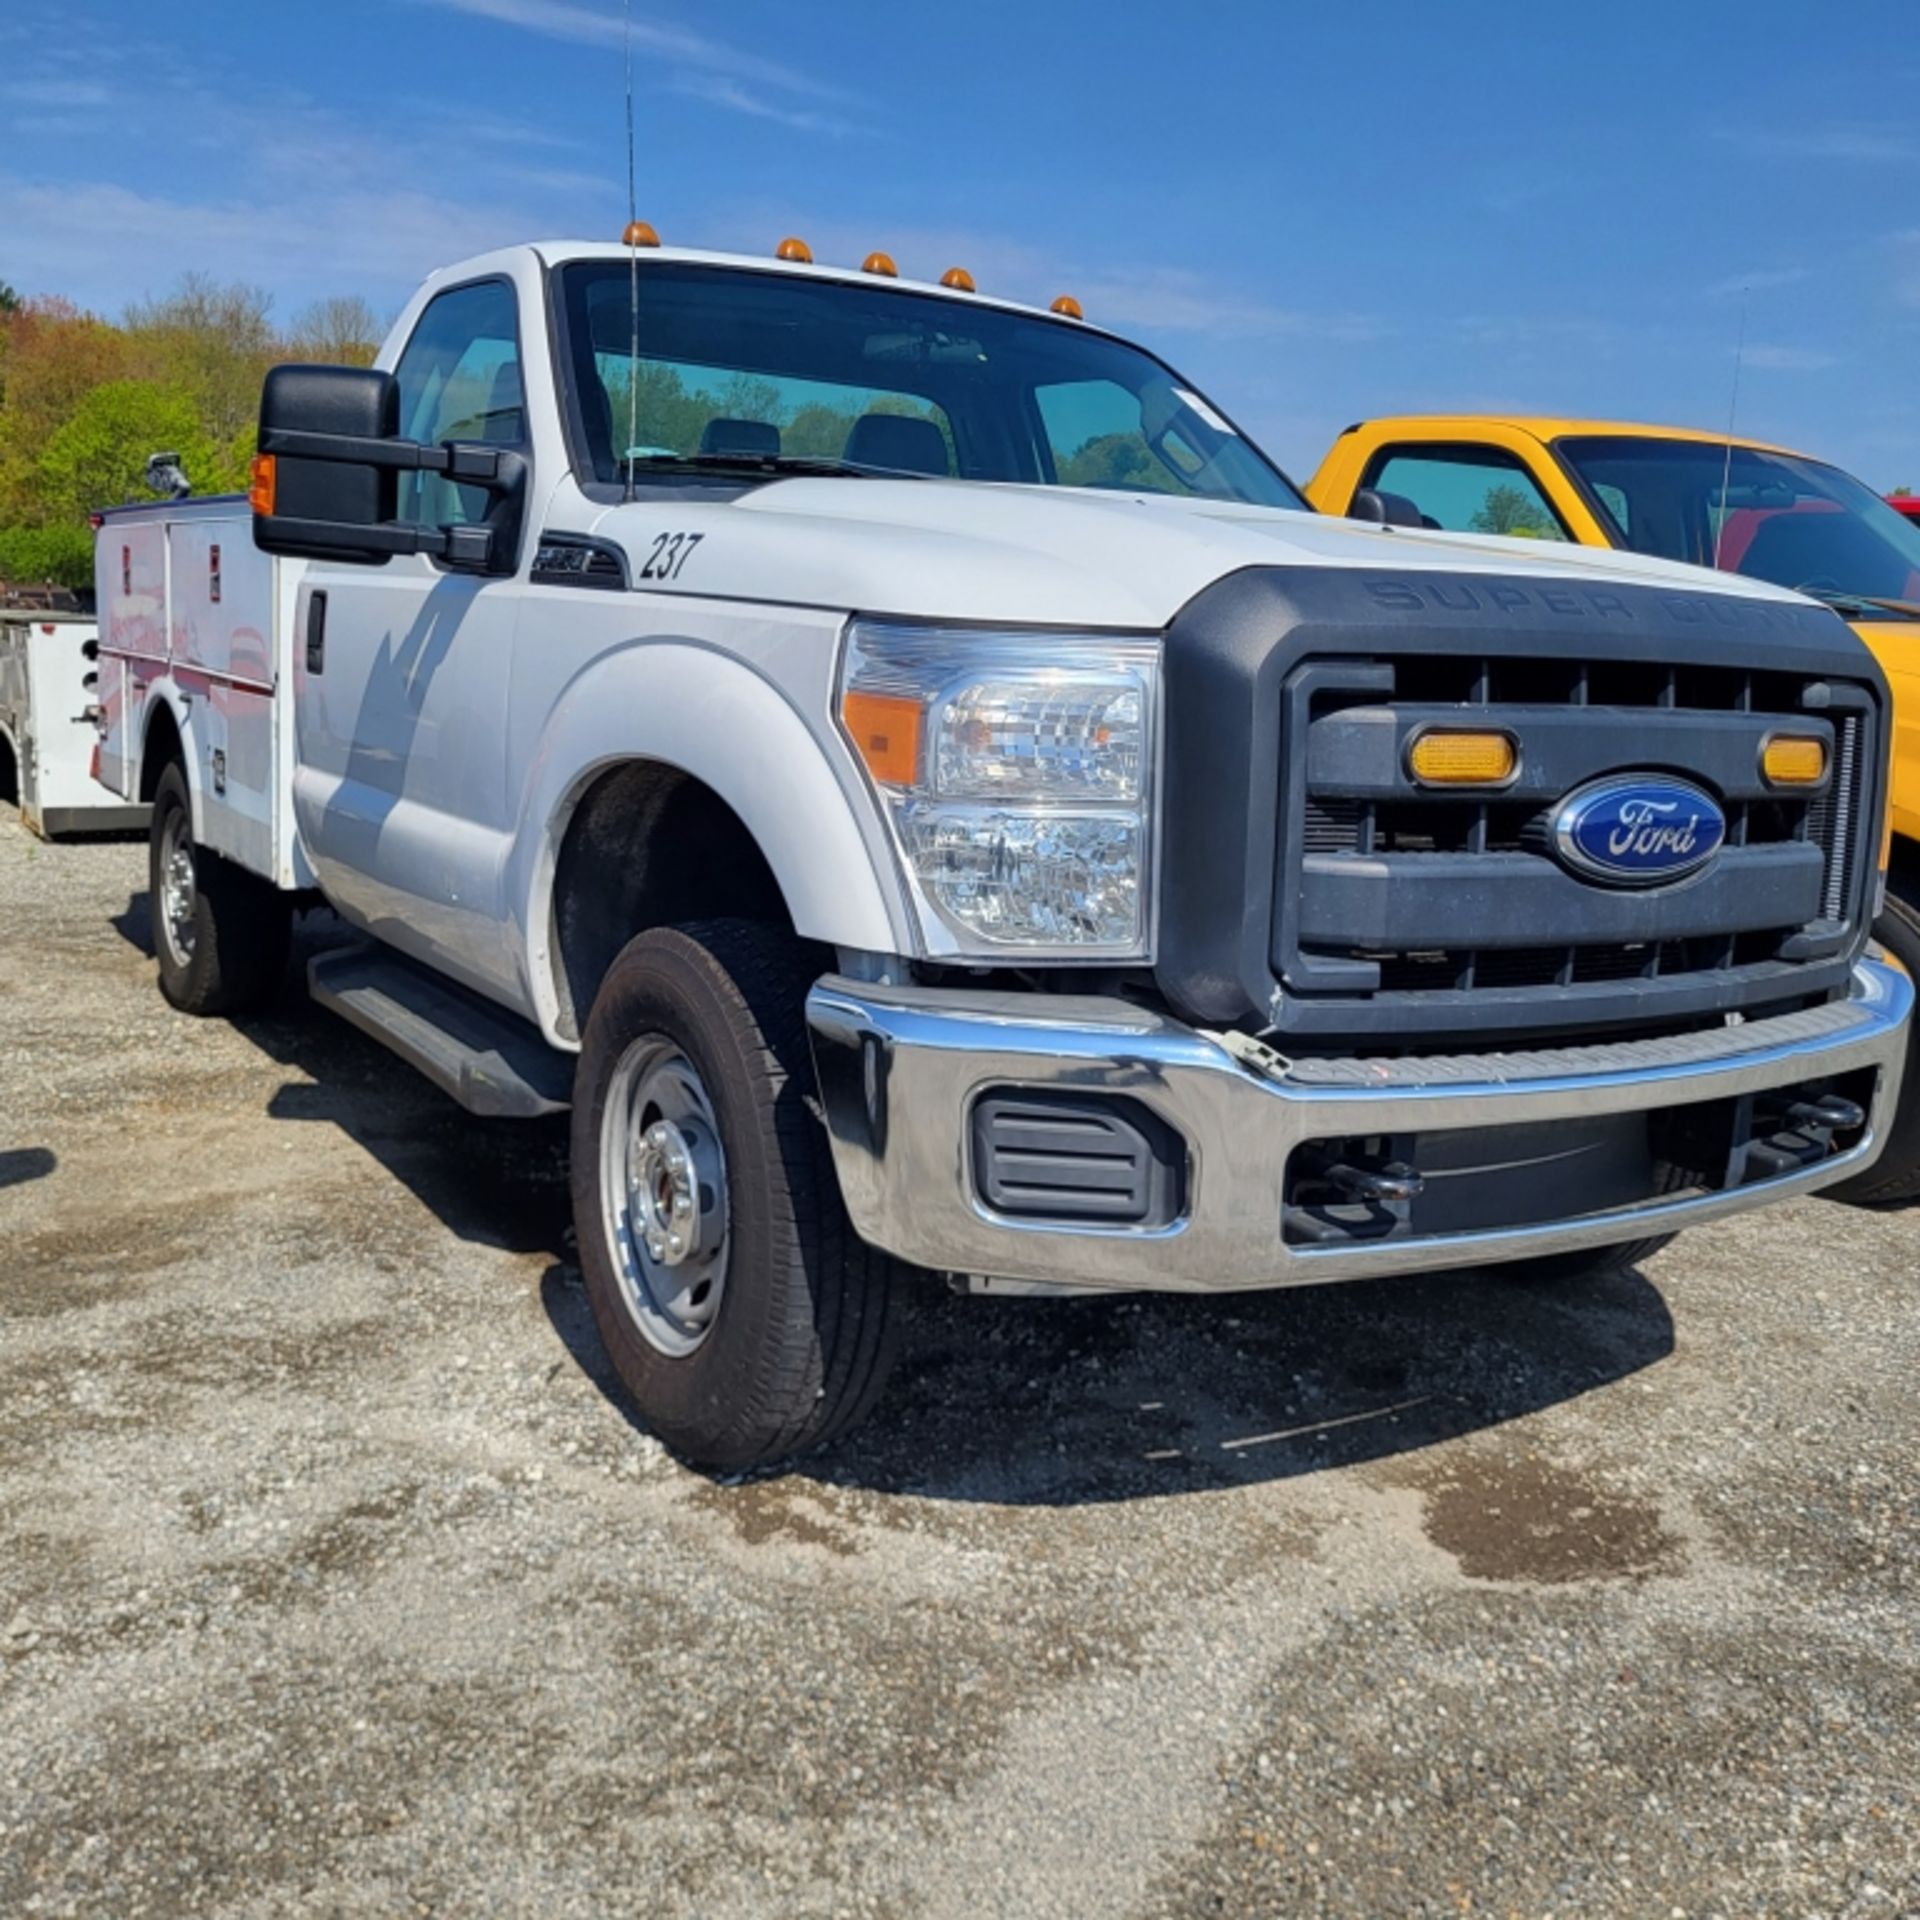 2013 Ford F-350 Pickup - Image 4 of 17